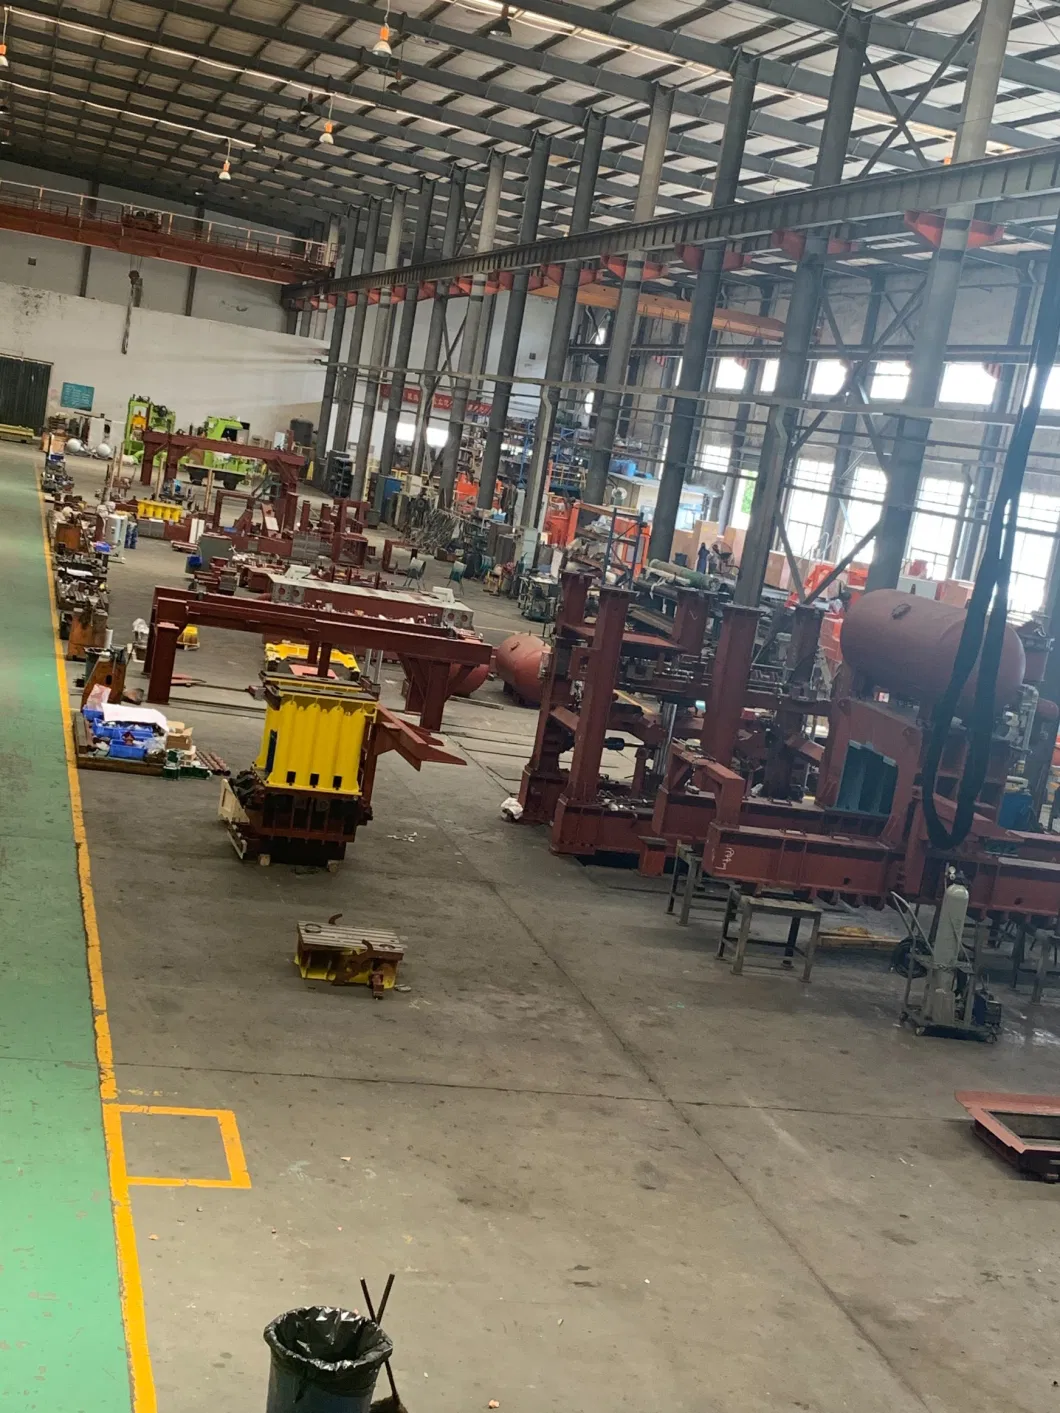 Green Sand Automatic Molding Production Line, Foundry Machine